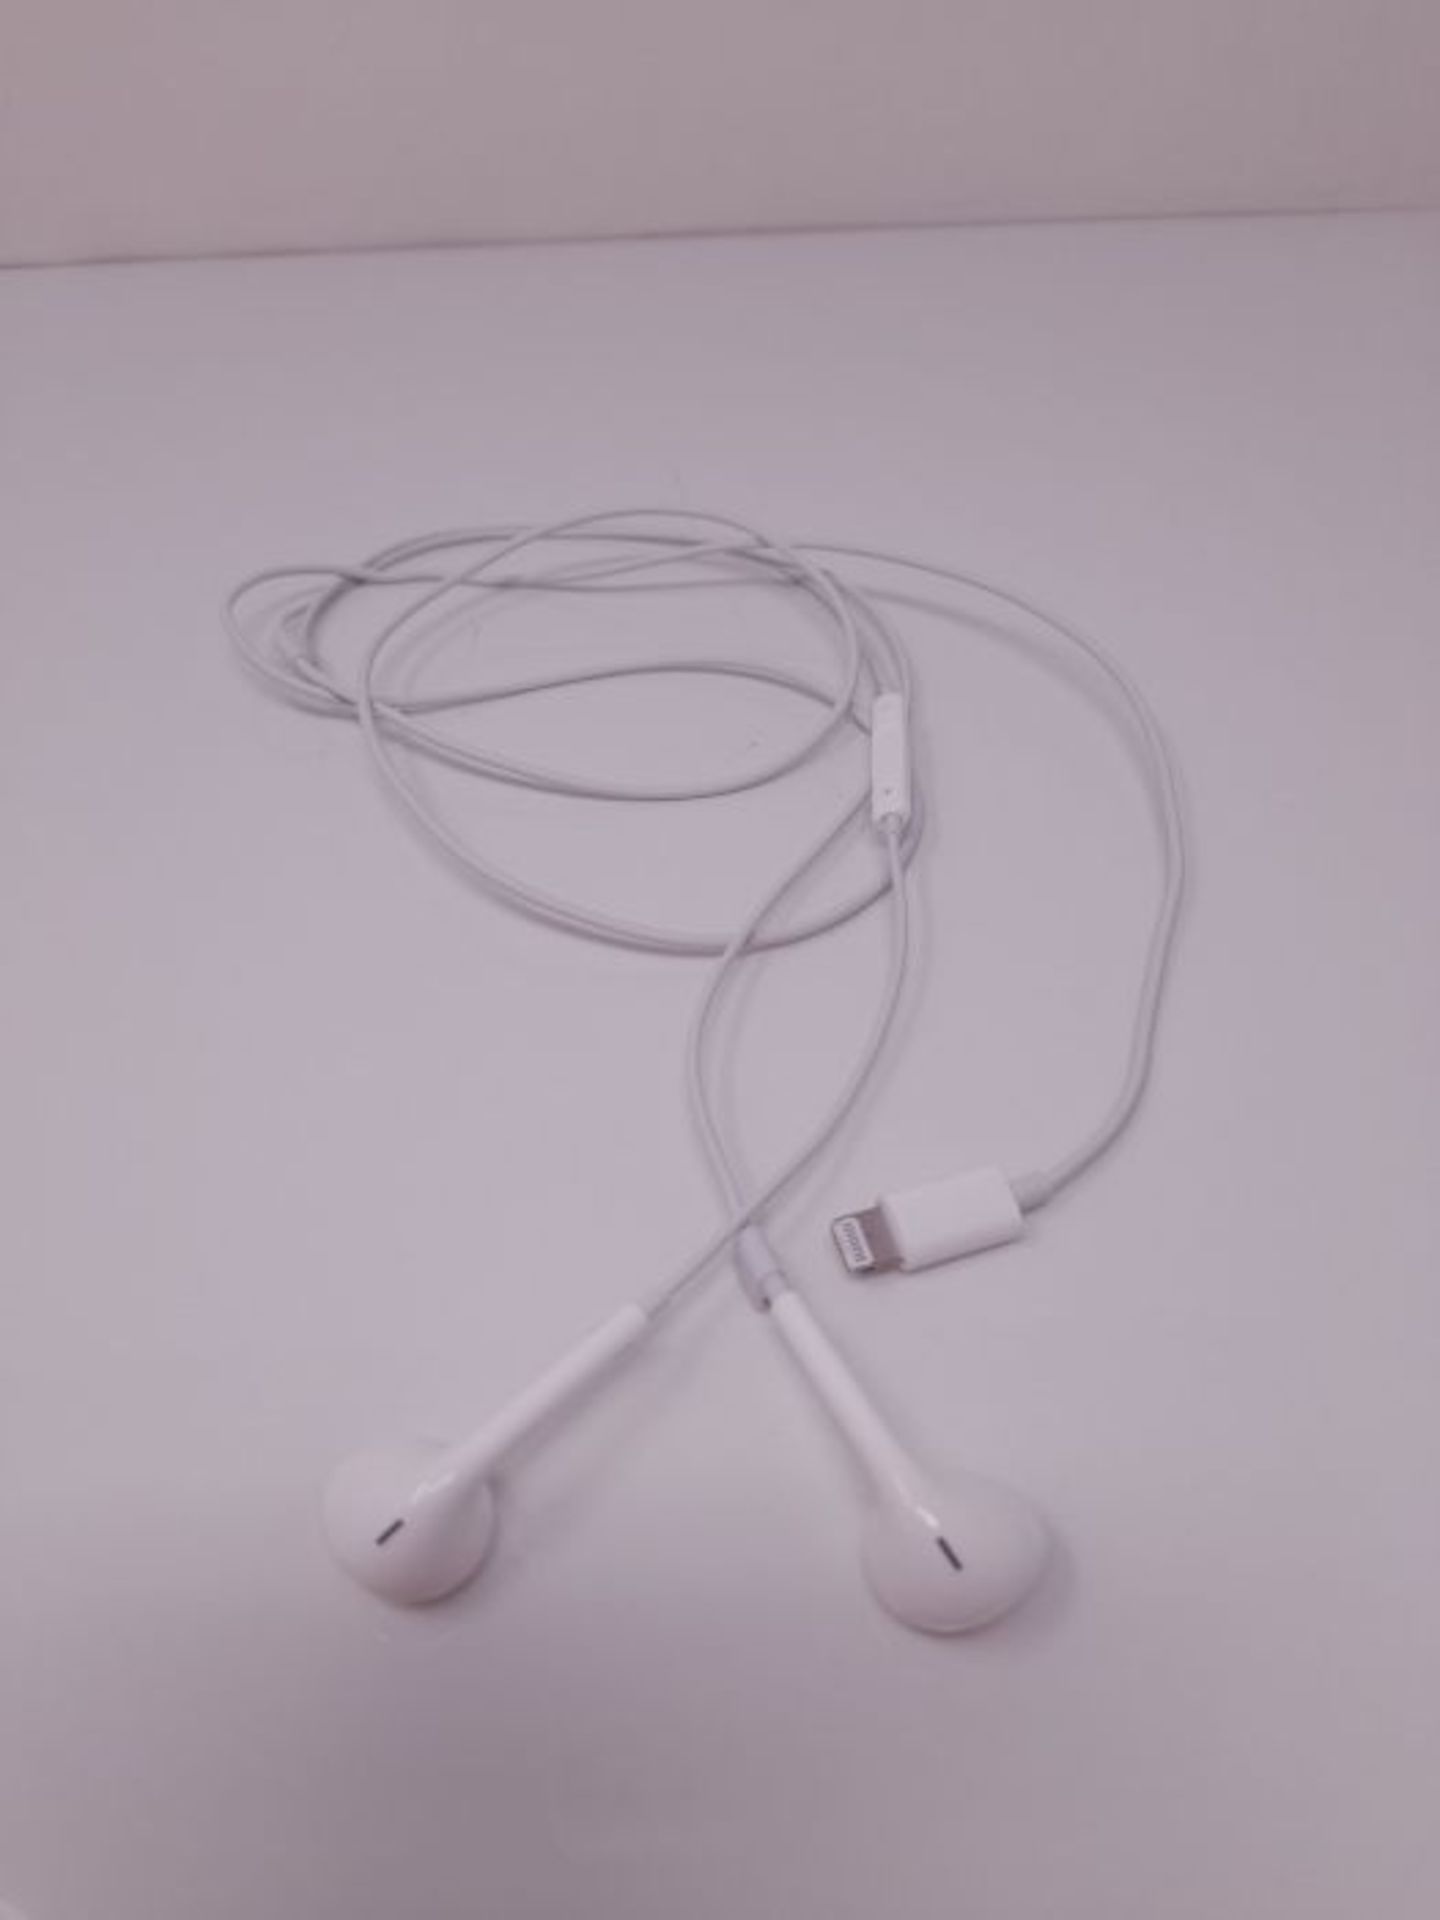 Apple EarPods with Lightning Connector - White - Image 2 of 3